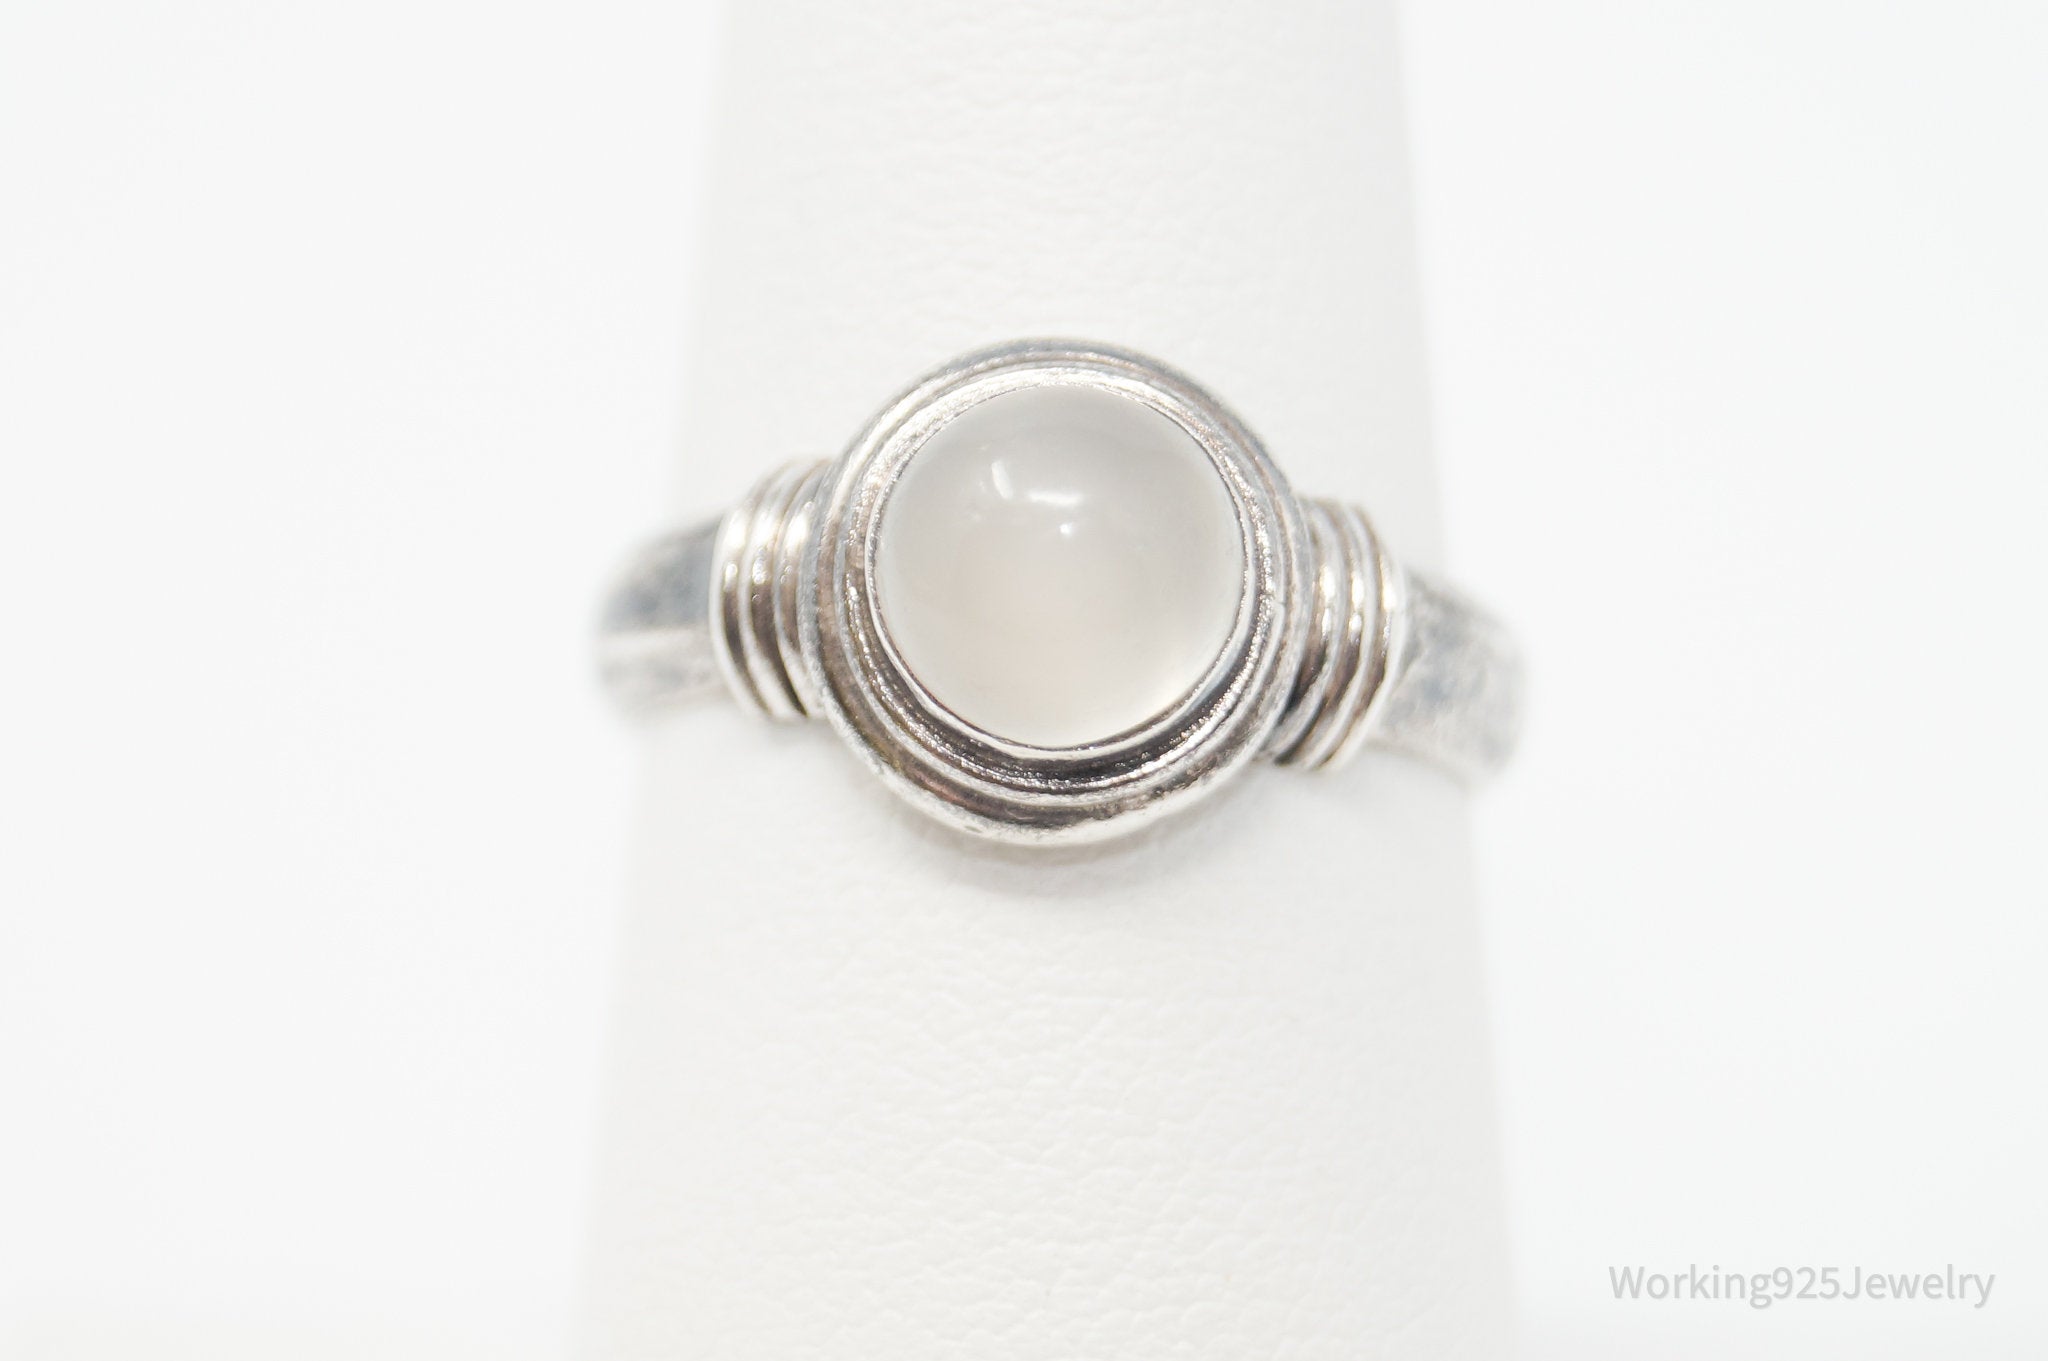 Vintage White Moonstone Sterling Silver Ring - Size 7